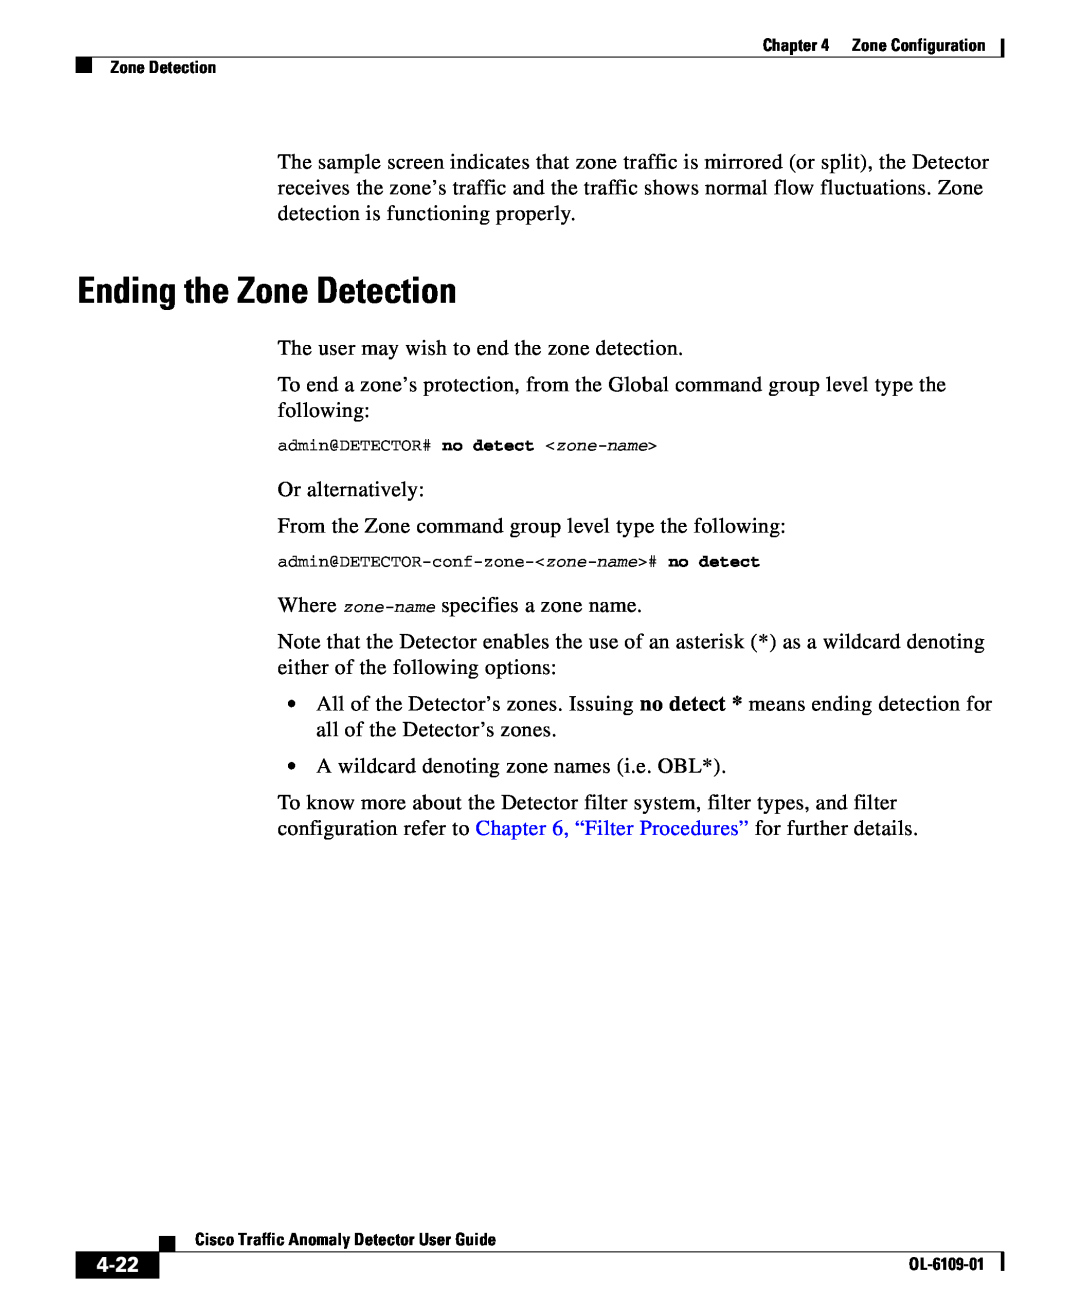 Cisco Systems OL-6109-01 manual Ending the Zone Detection, 4-22, admin@DETECTOR# no detect zone-name 